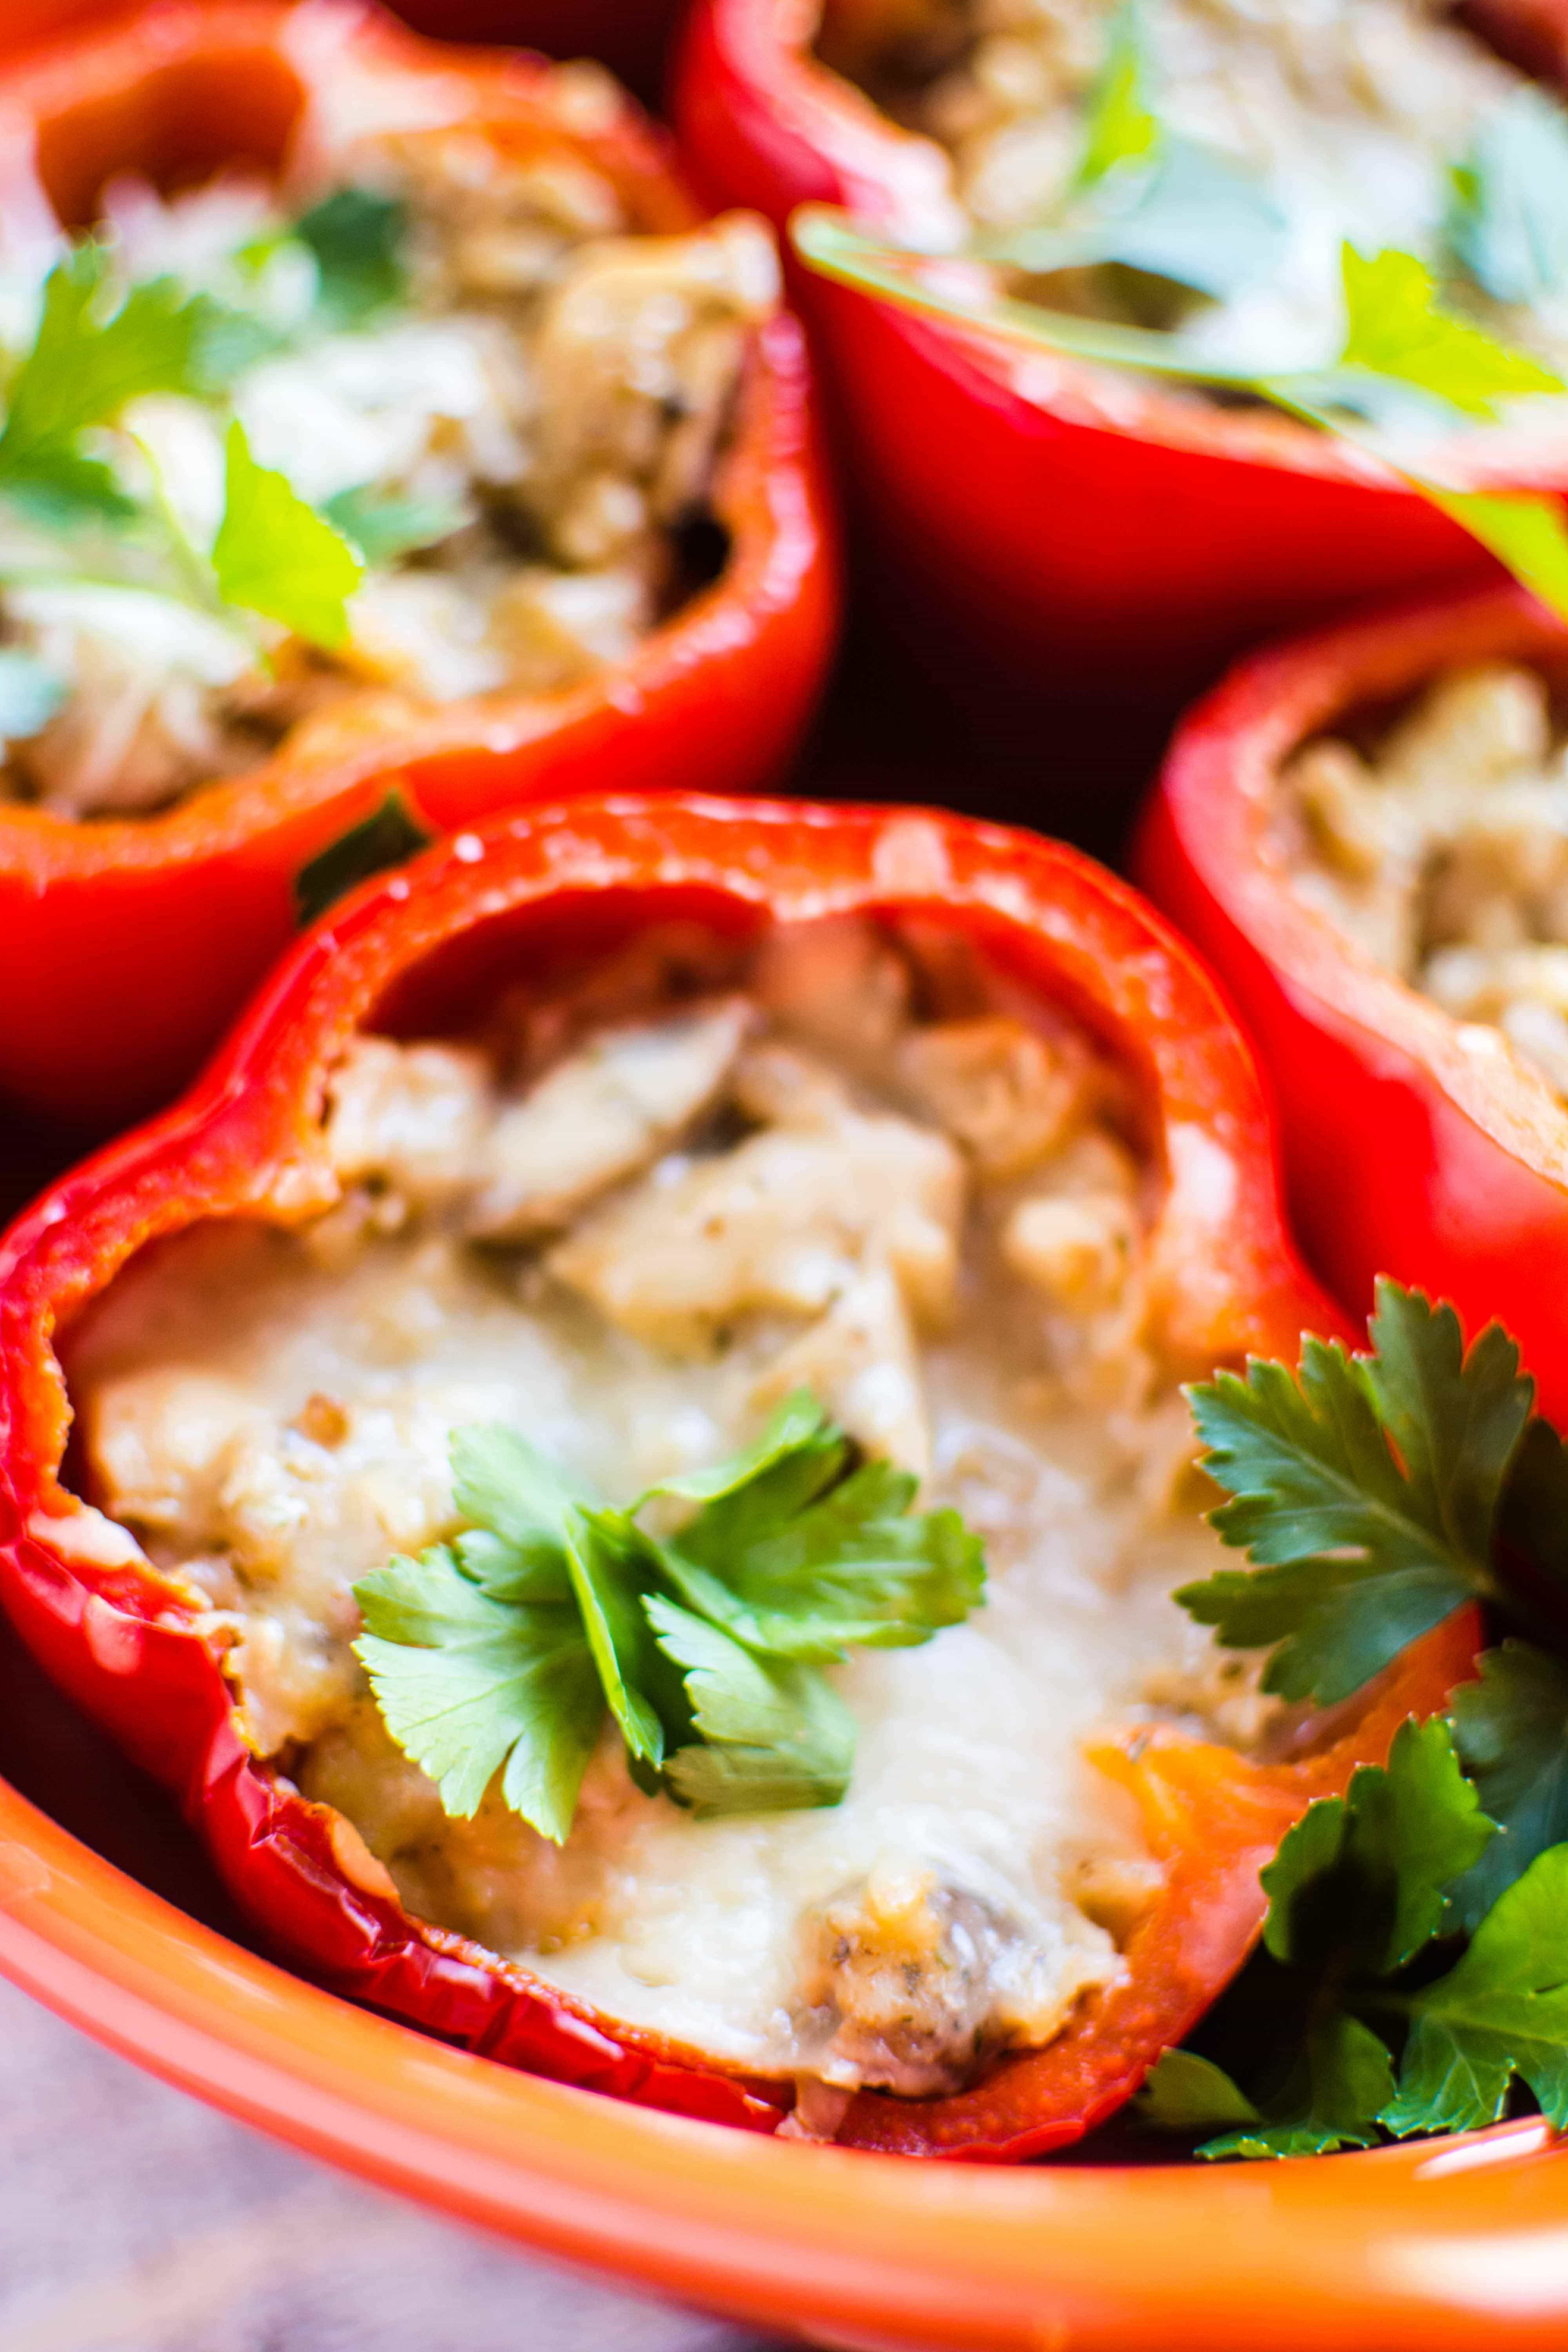 four stuffed red peppers in red serving dish